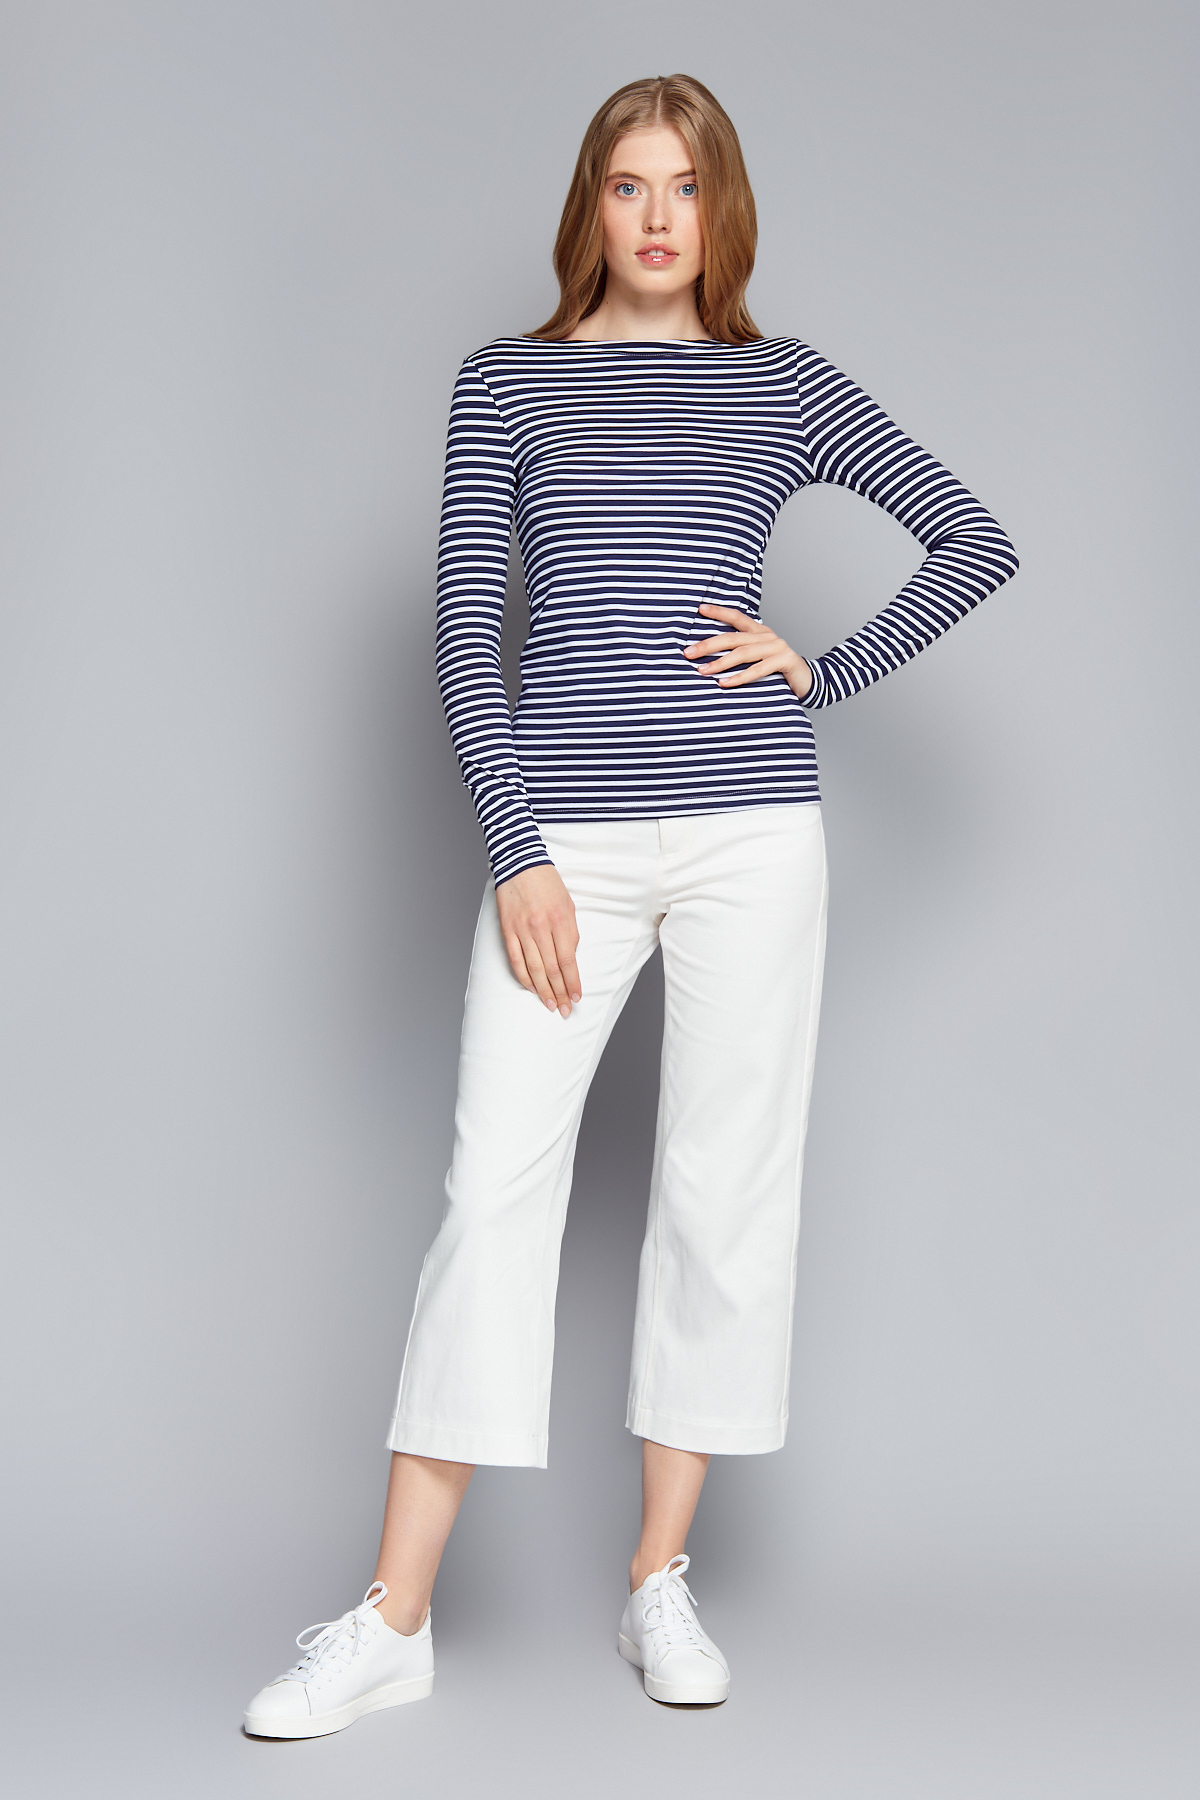 Blue and white striped knit jumper, photo 2